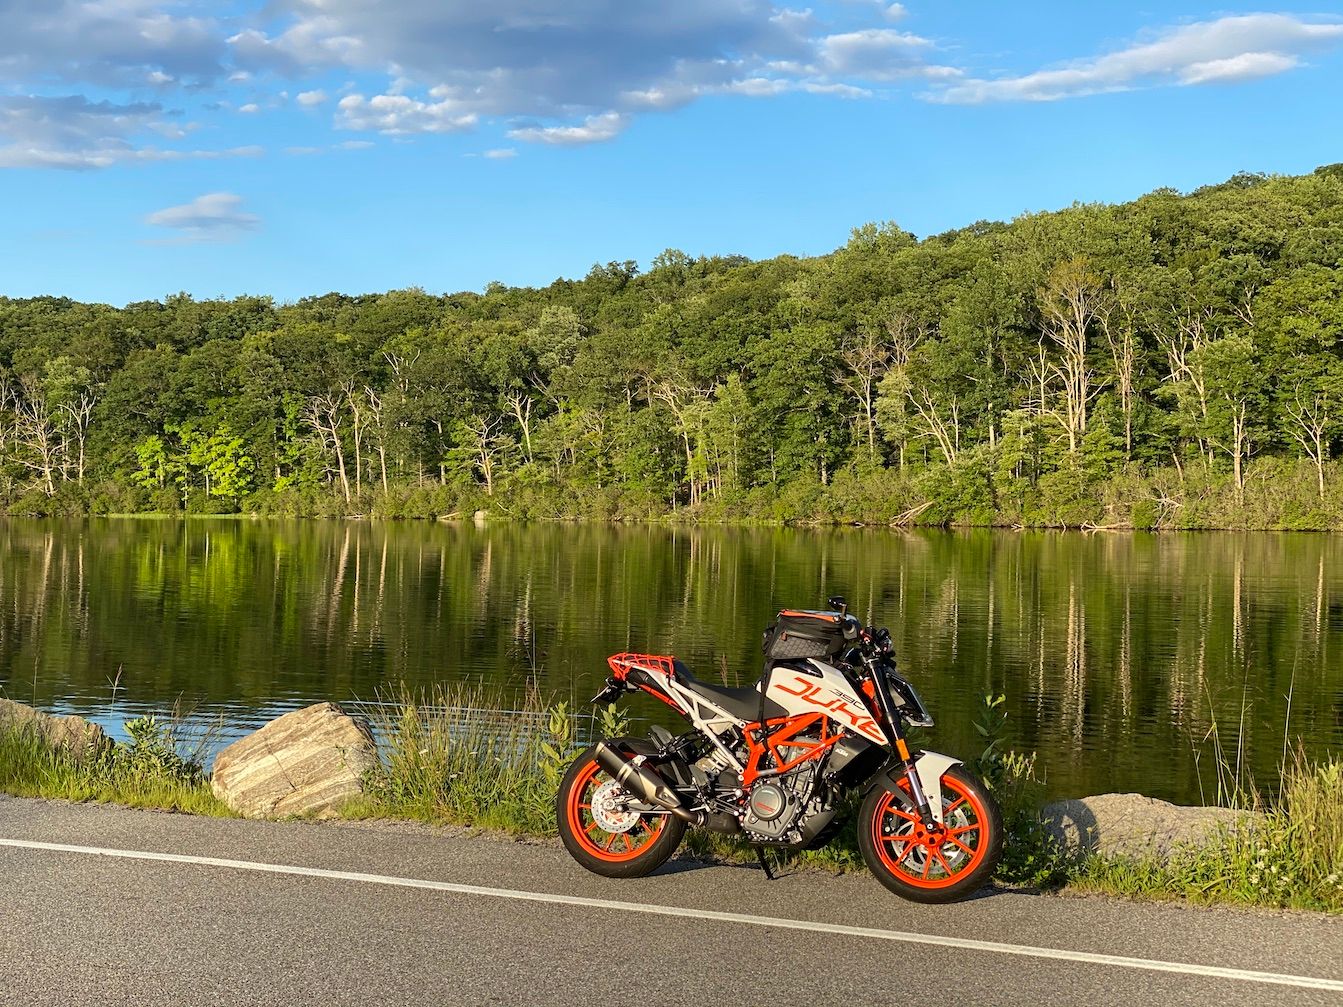 My Duke 390 sitting on the side of the road with a background of a pond and some woods reflecting on it.